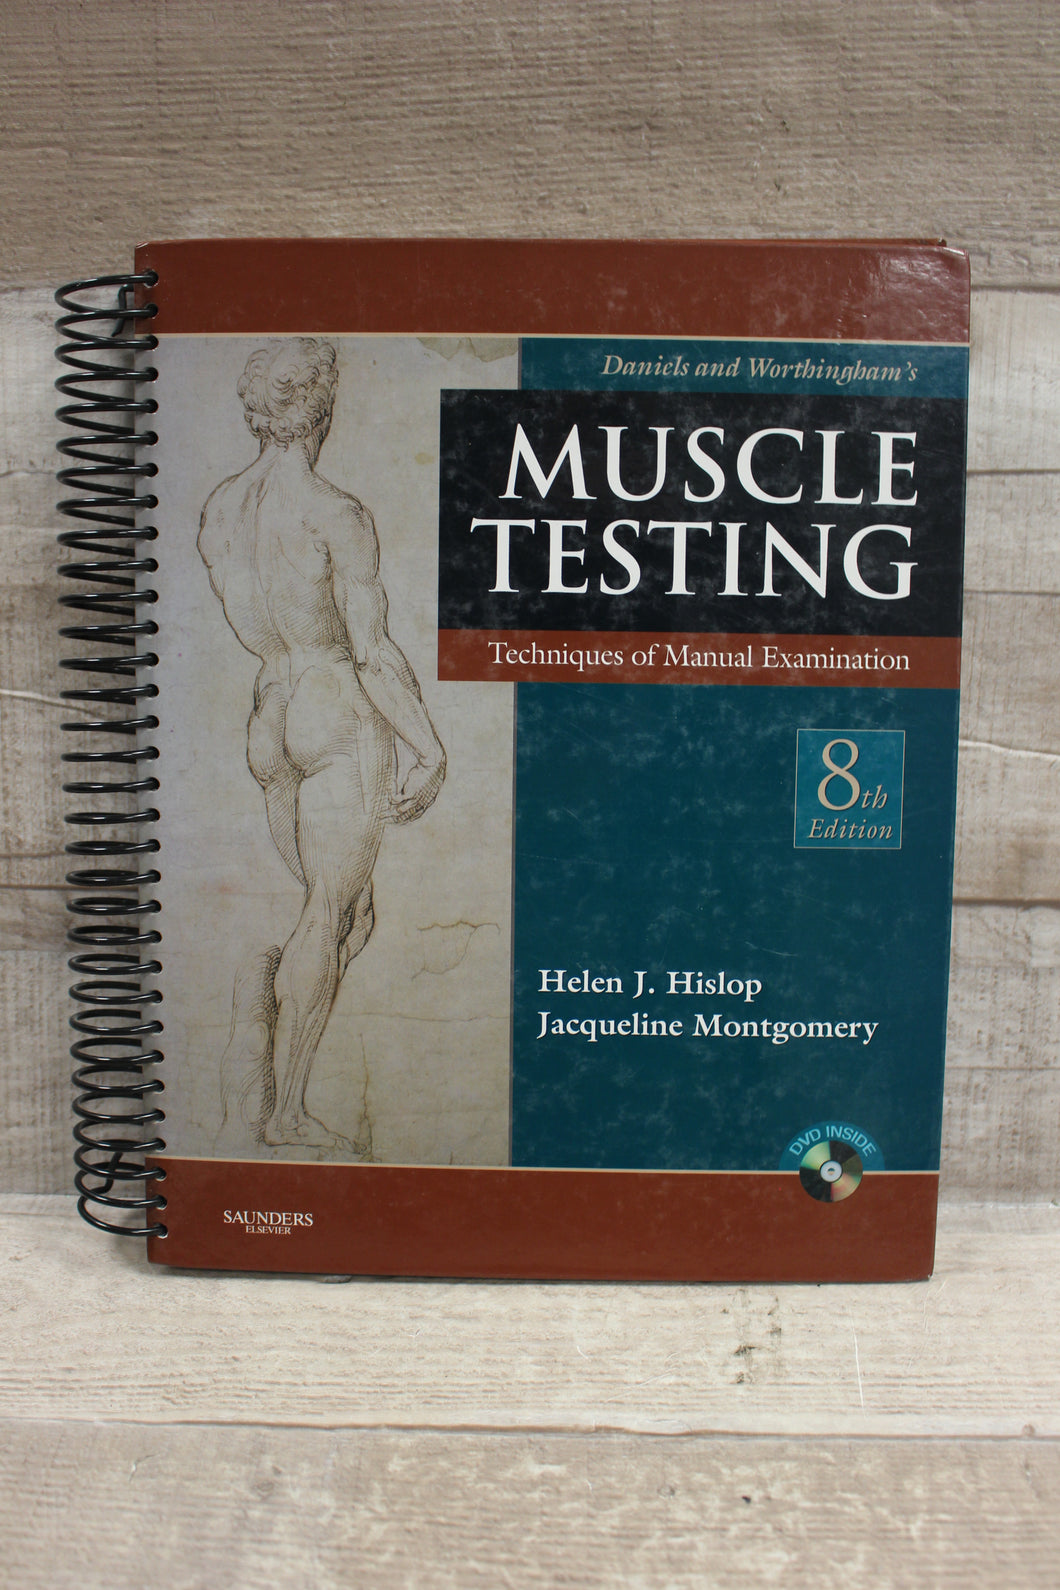 Muscle Testing Techniques Of Manual Examination By Helen J. Hislop -Used